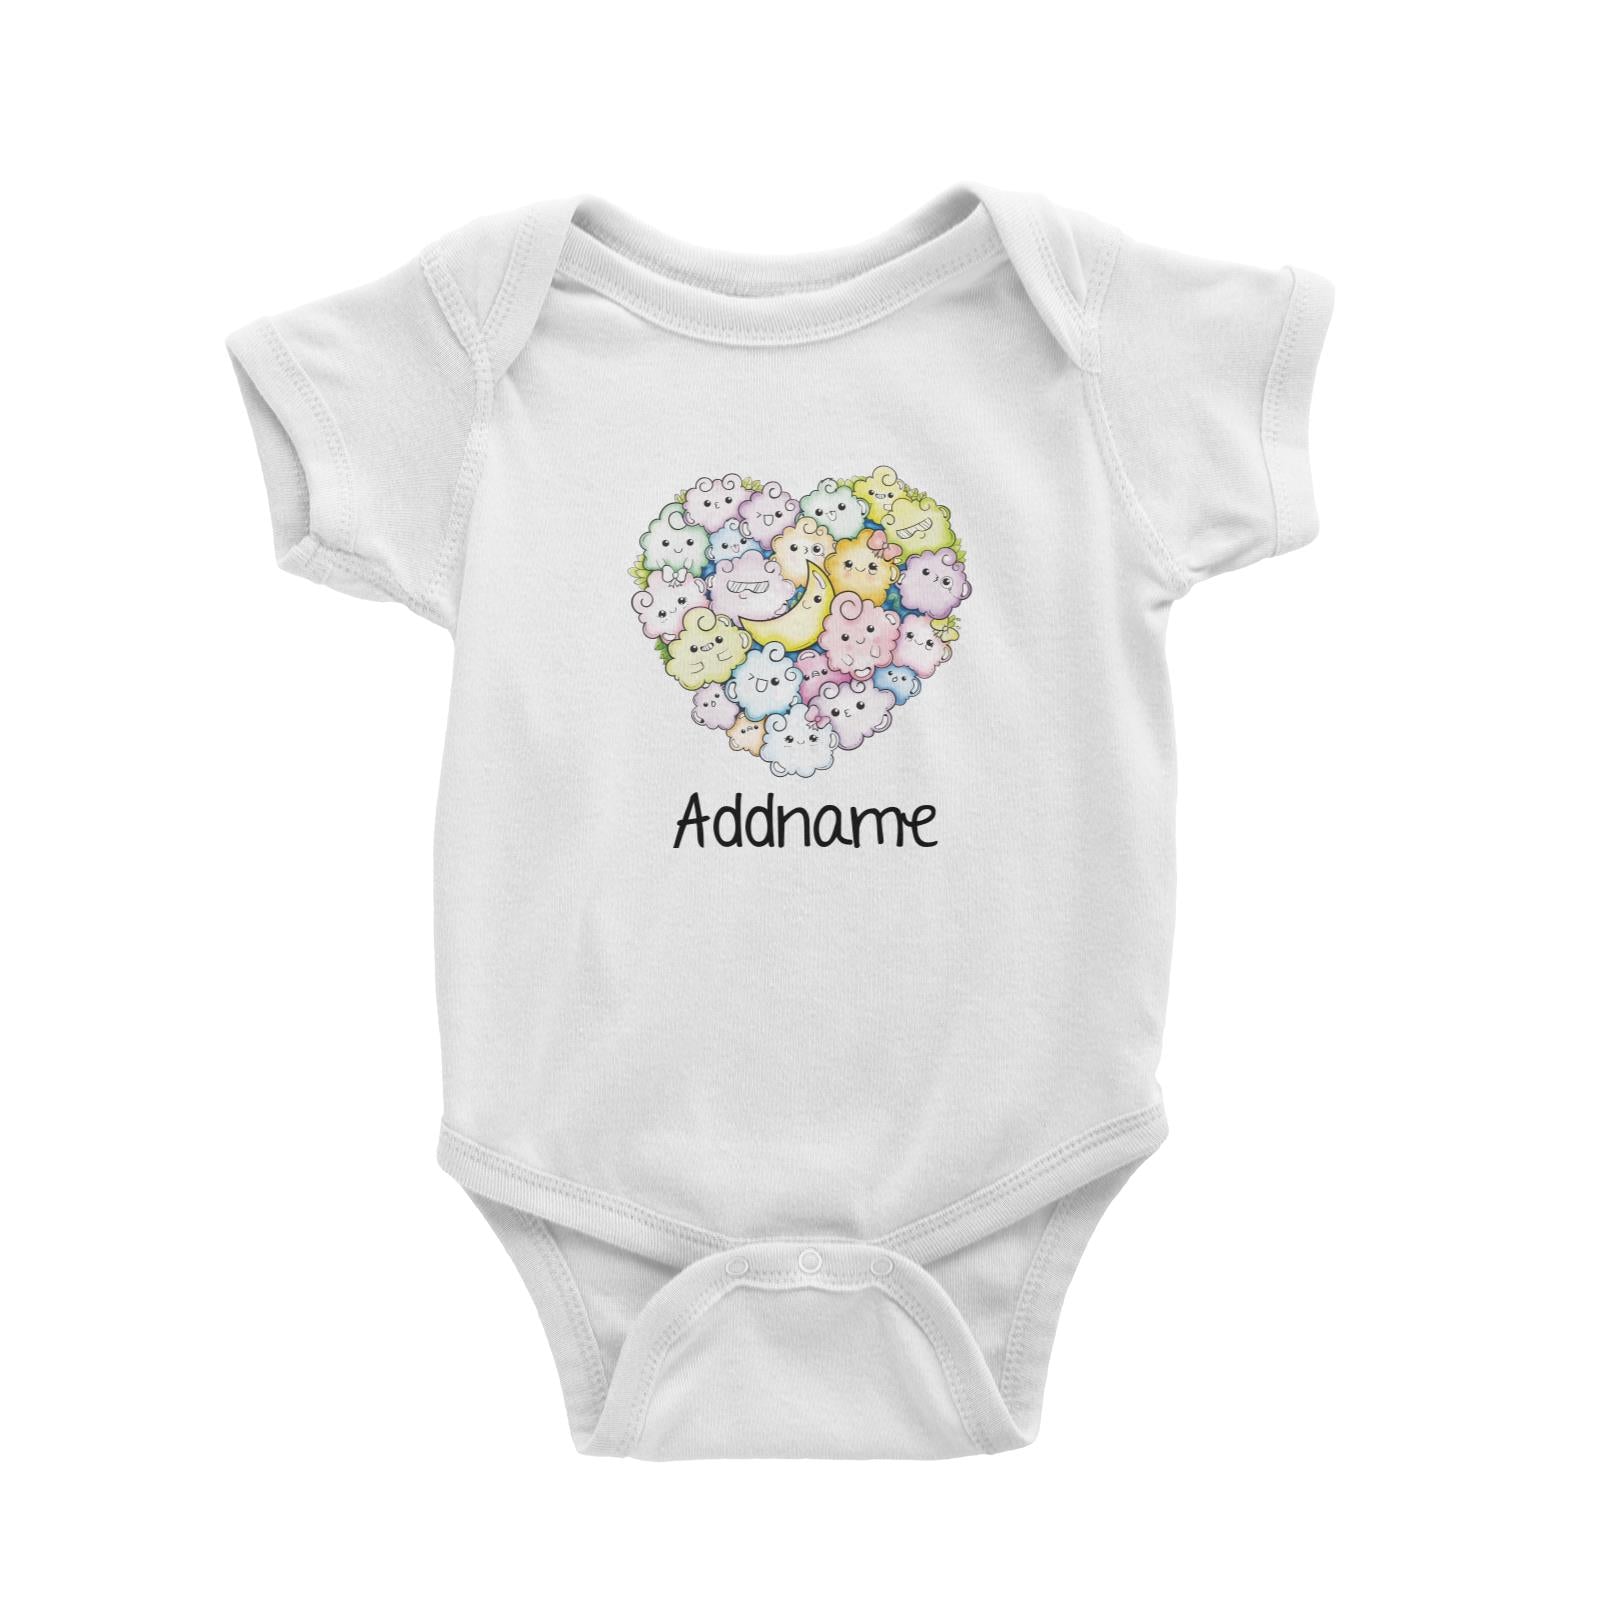 Cute Animals And Friends Series Cute Little Cloud Group Heart Addname Baby Romper